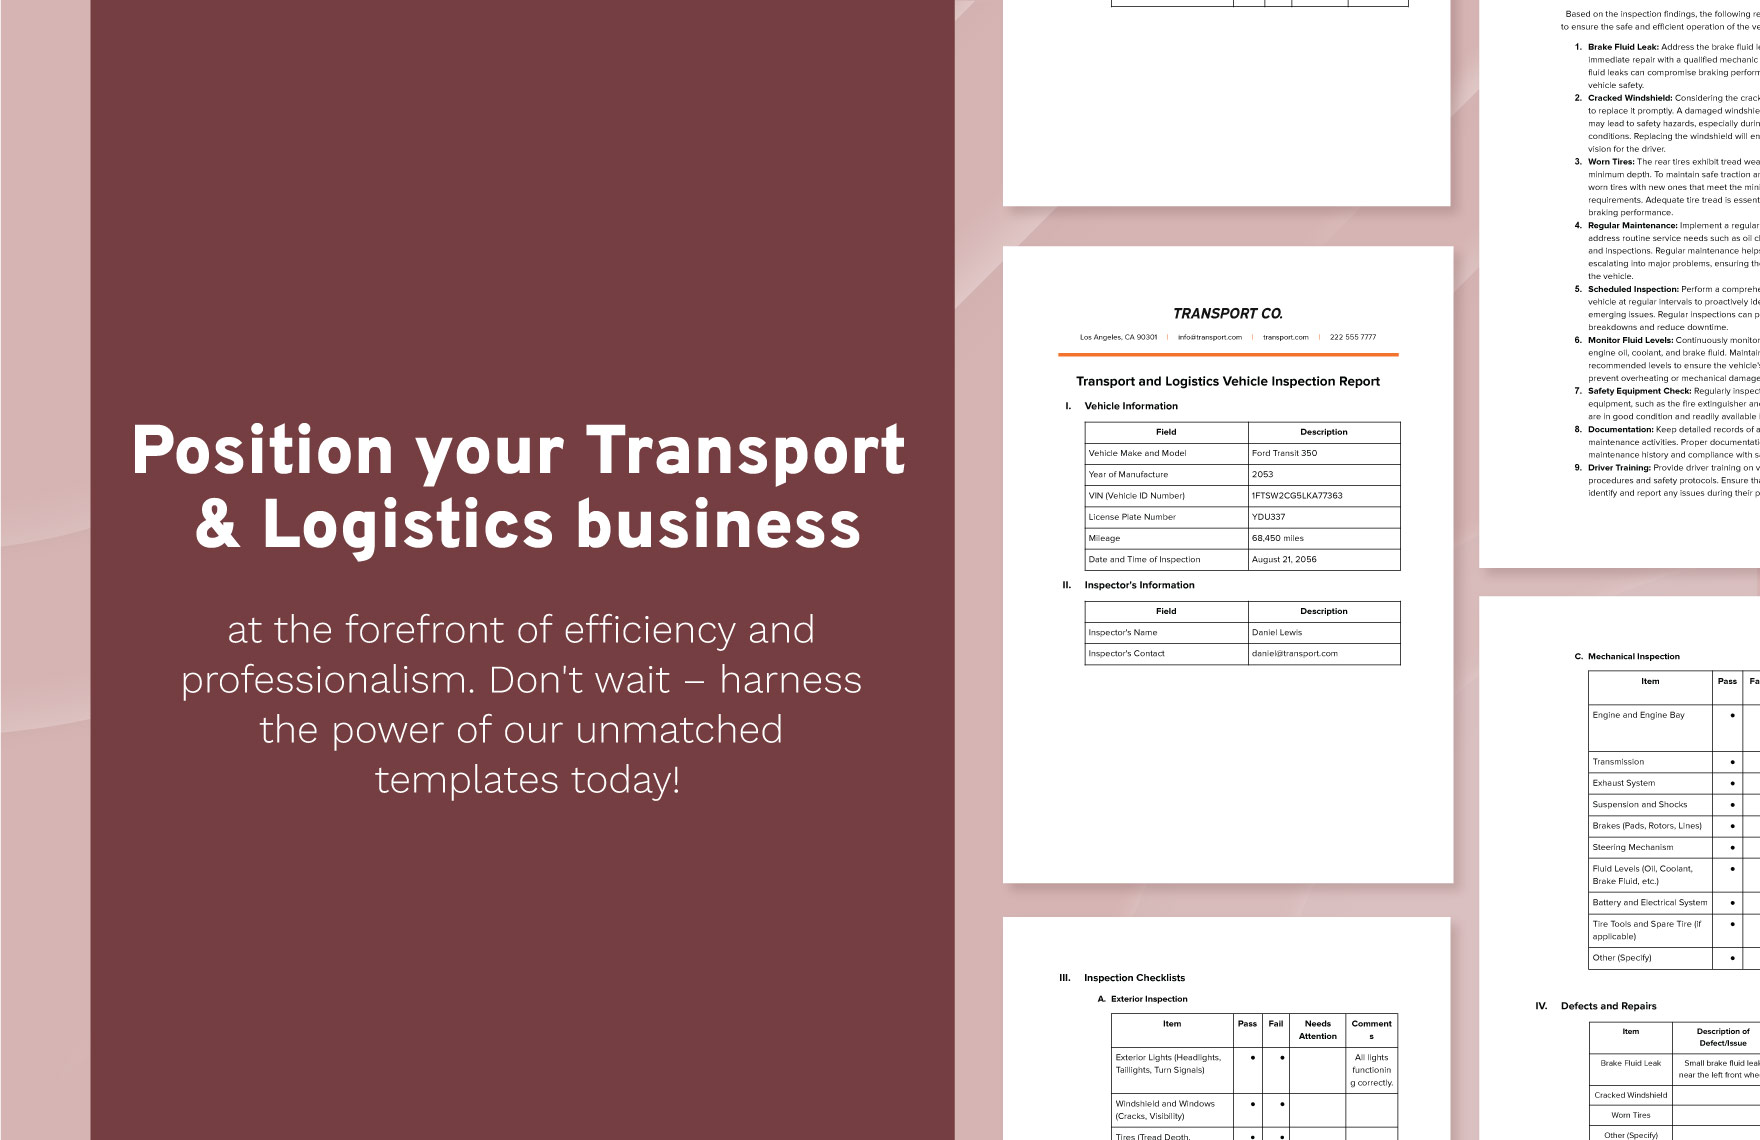 Transport and Logistics Vehicle Inspection Report Template